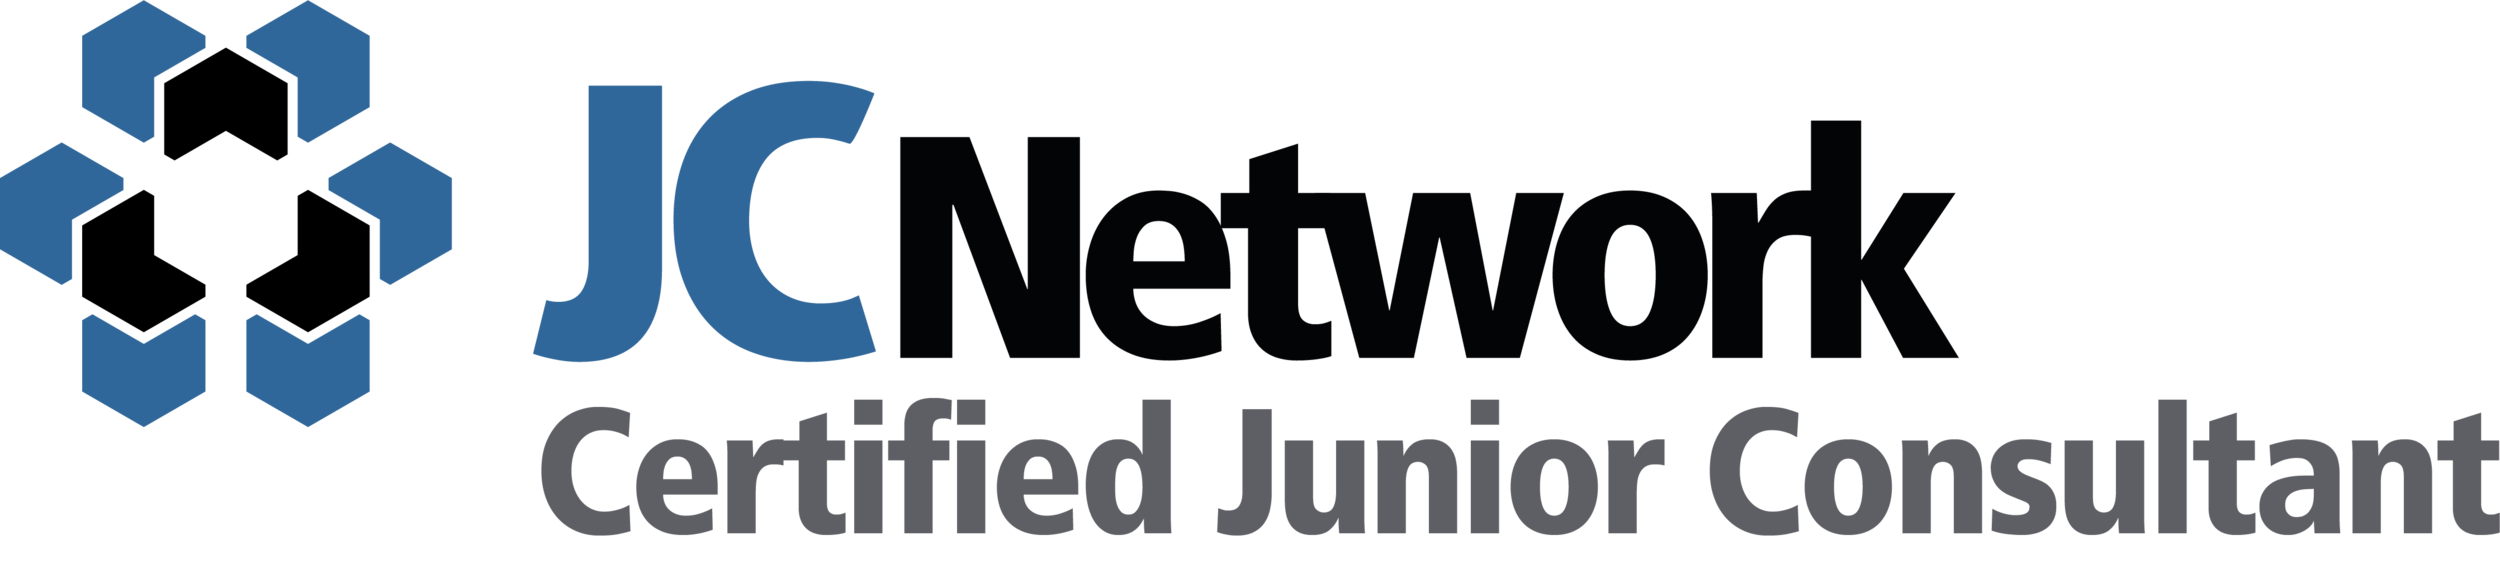 JCNetwork-Certified-Junior-Consultant.png